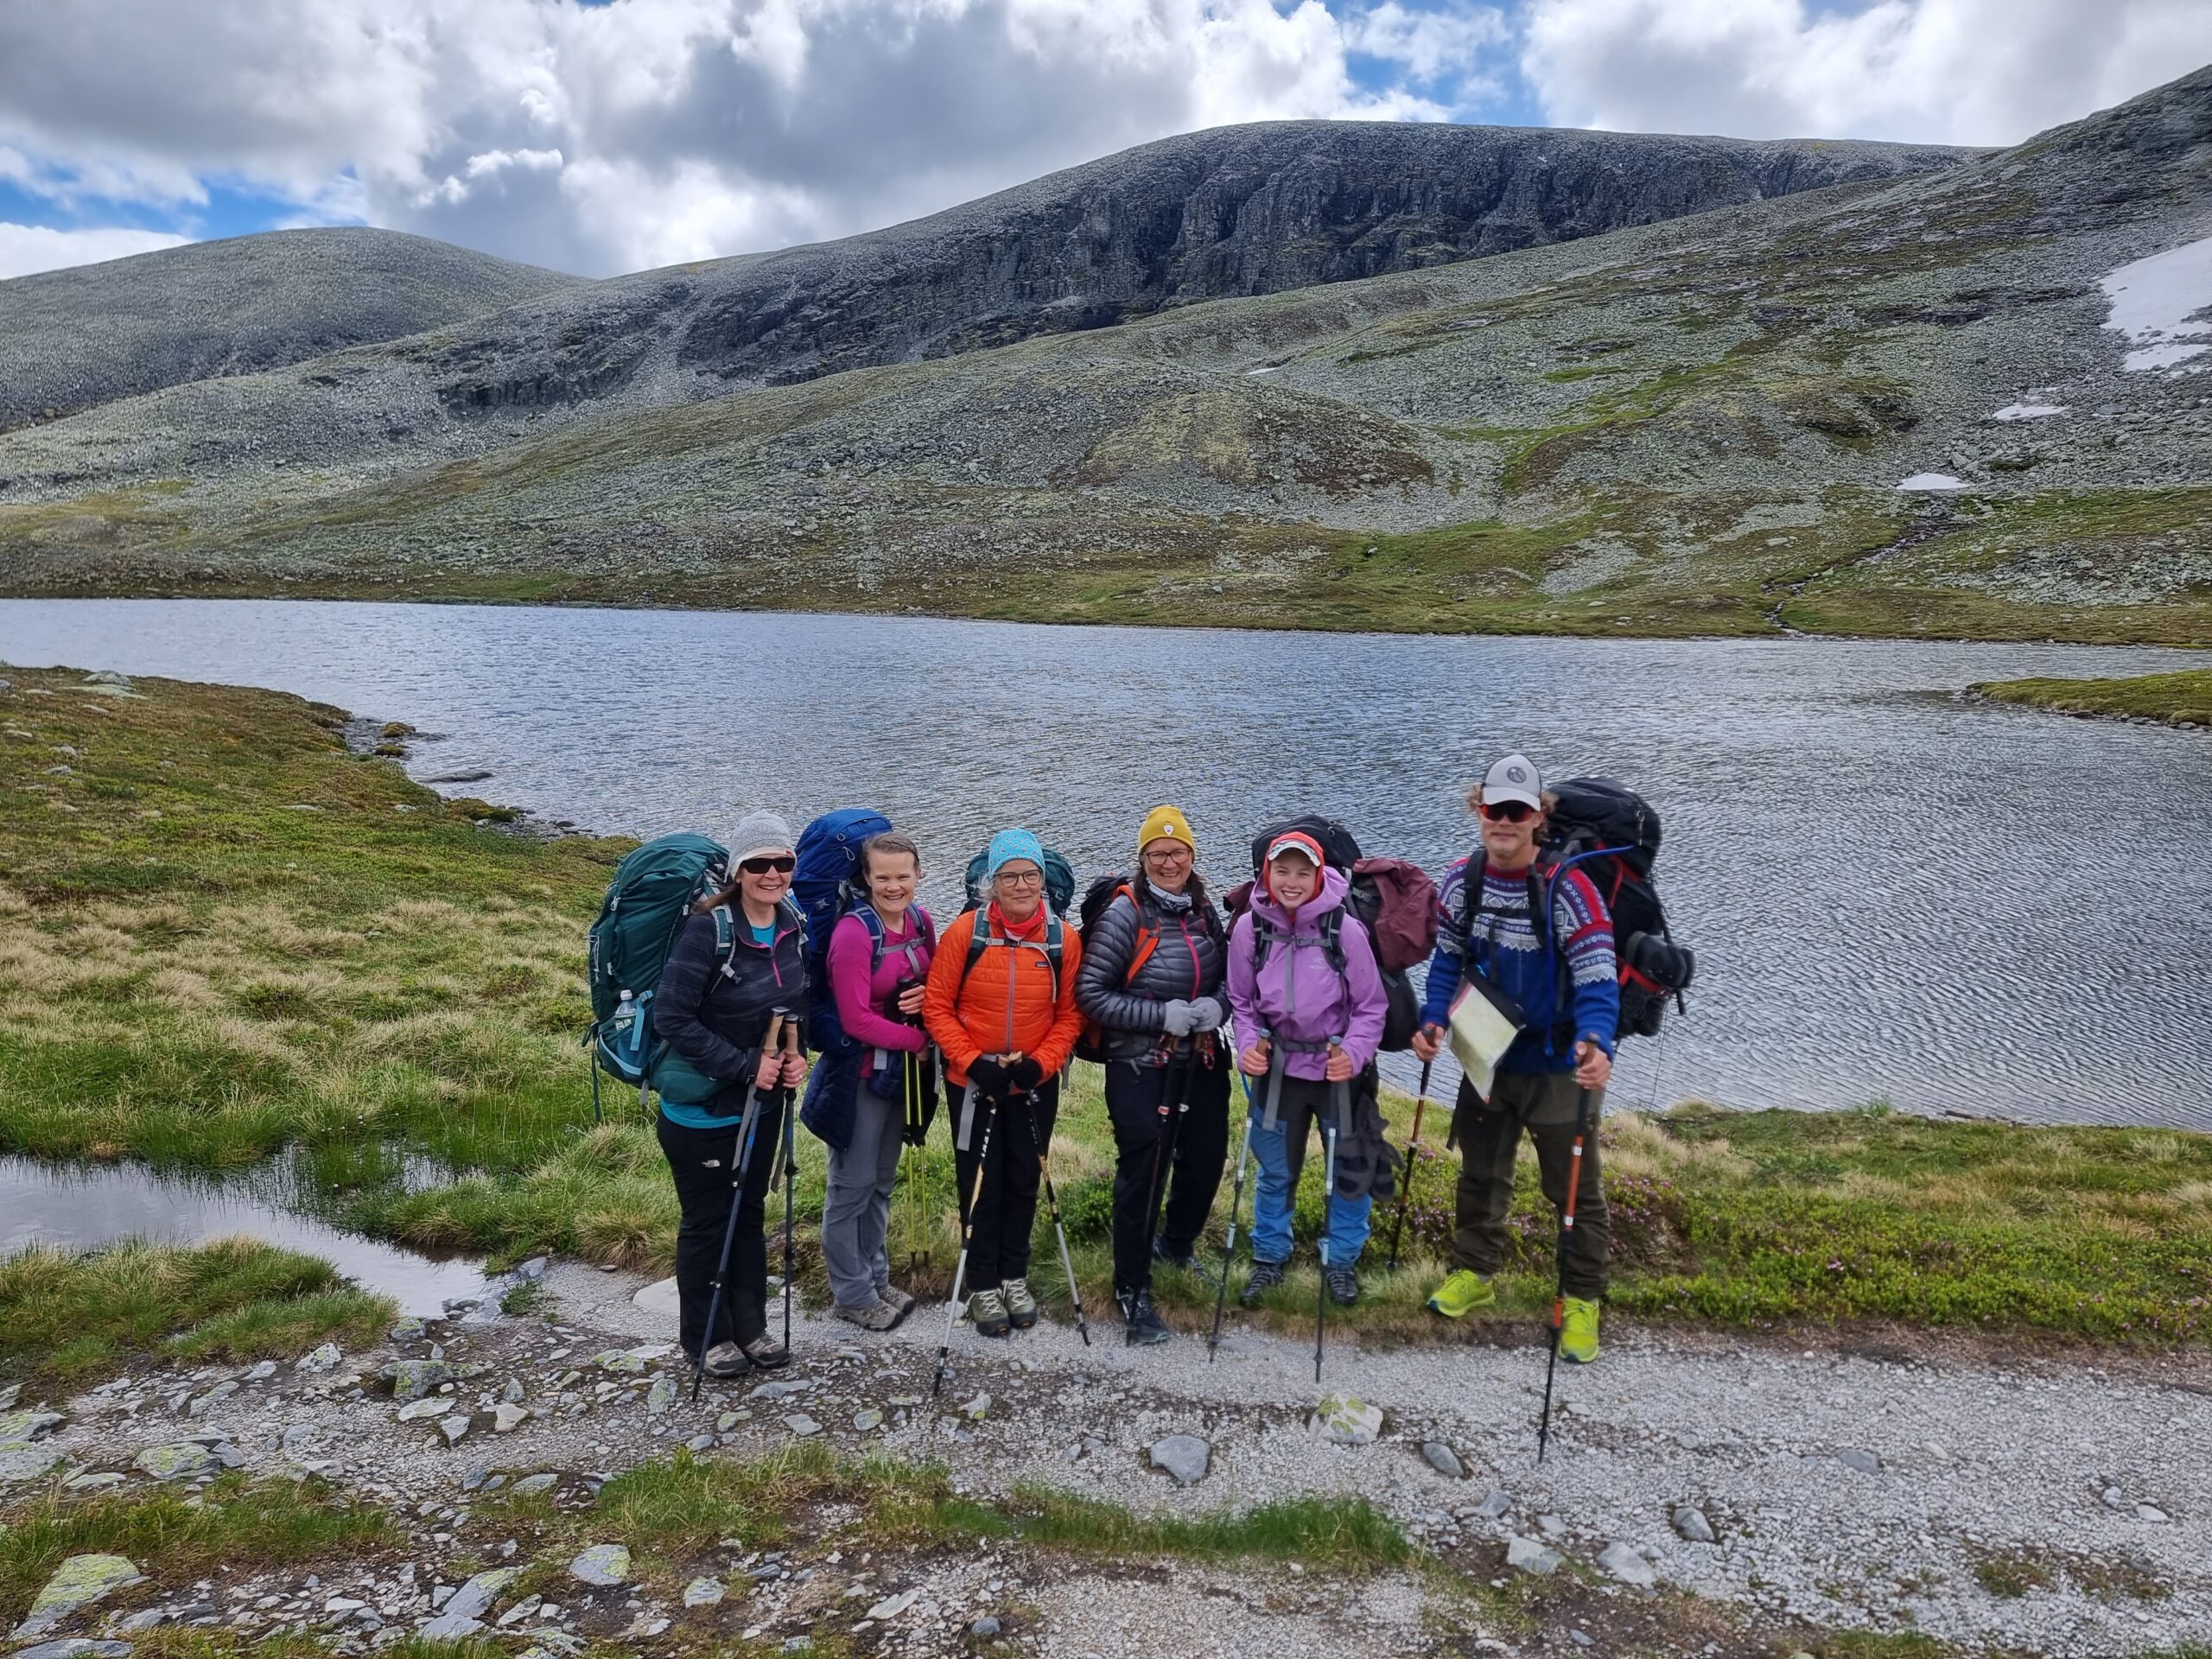 You are currently viewing Day 72 – Rondane: Flatt og mye steiner (Rondane: Flat and rocky trail)